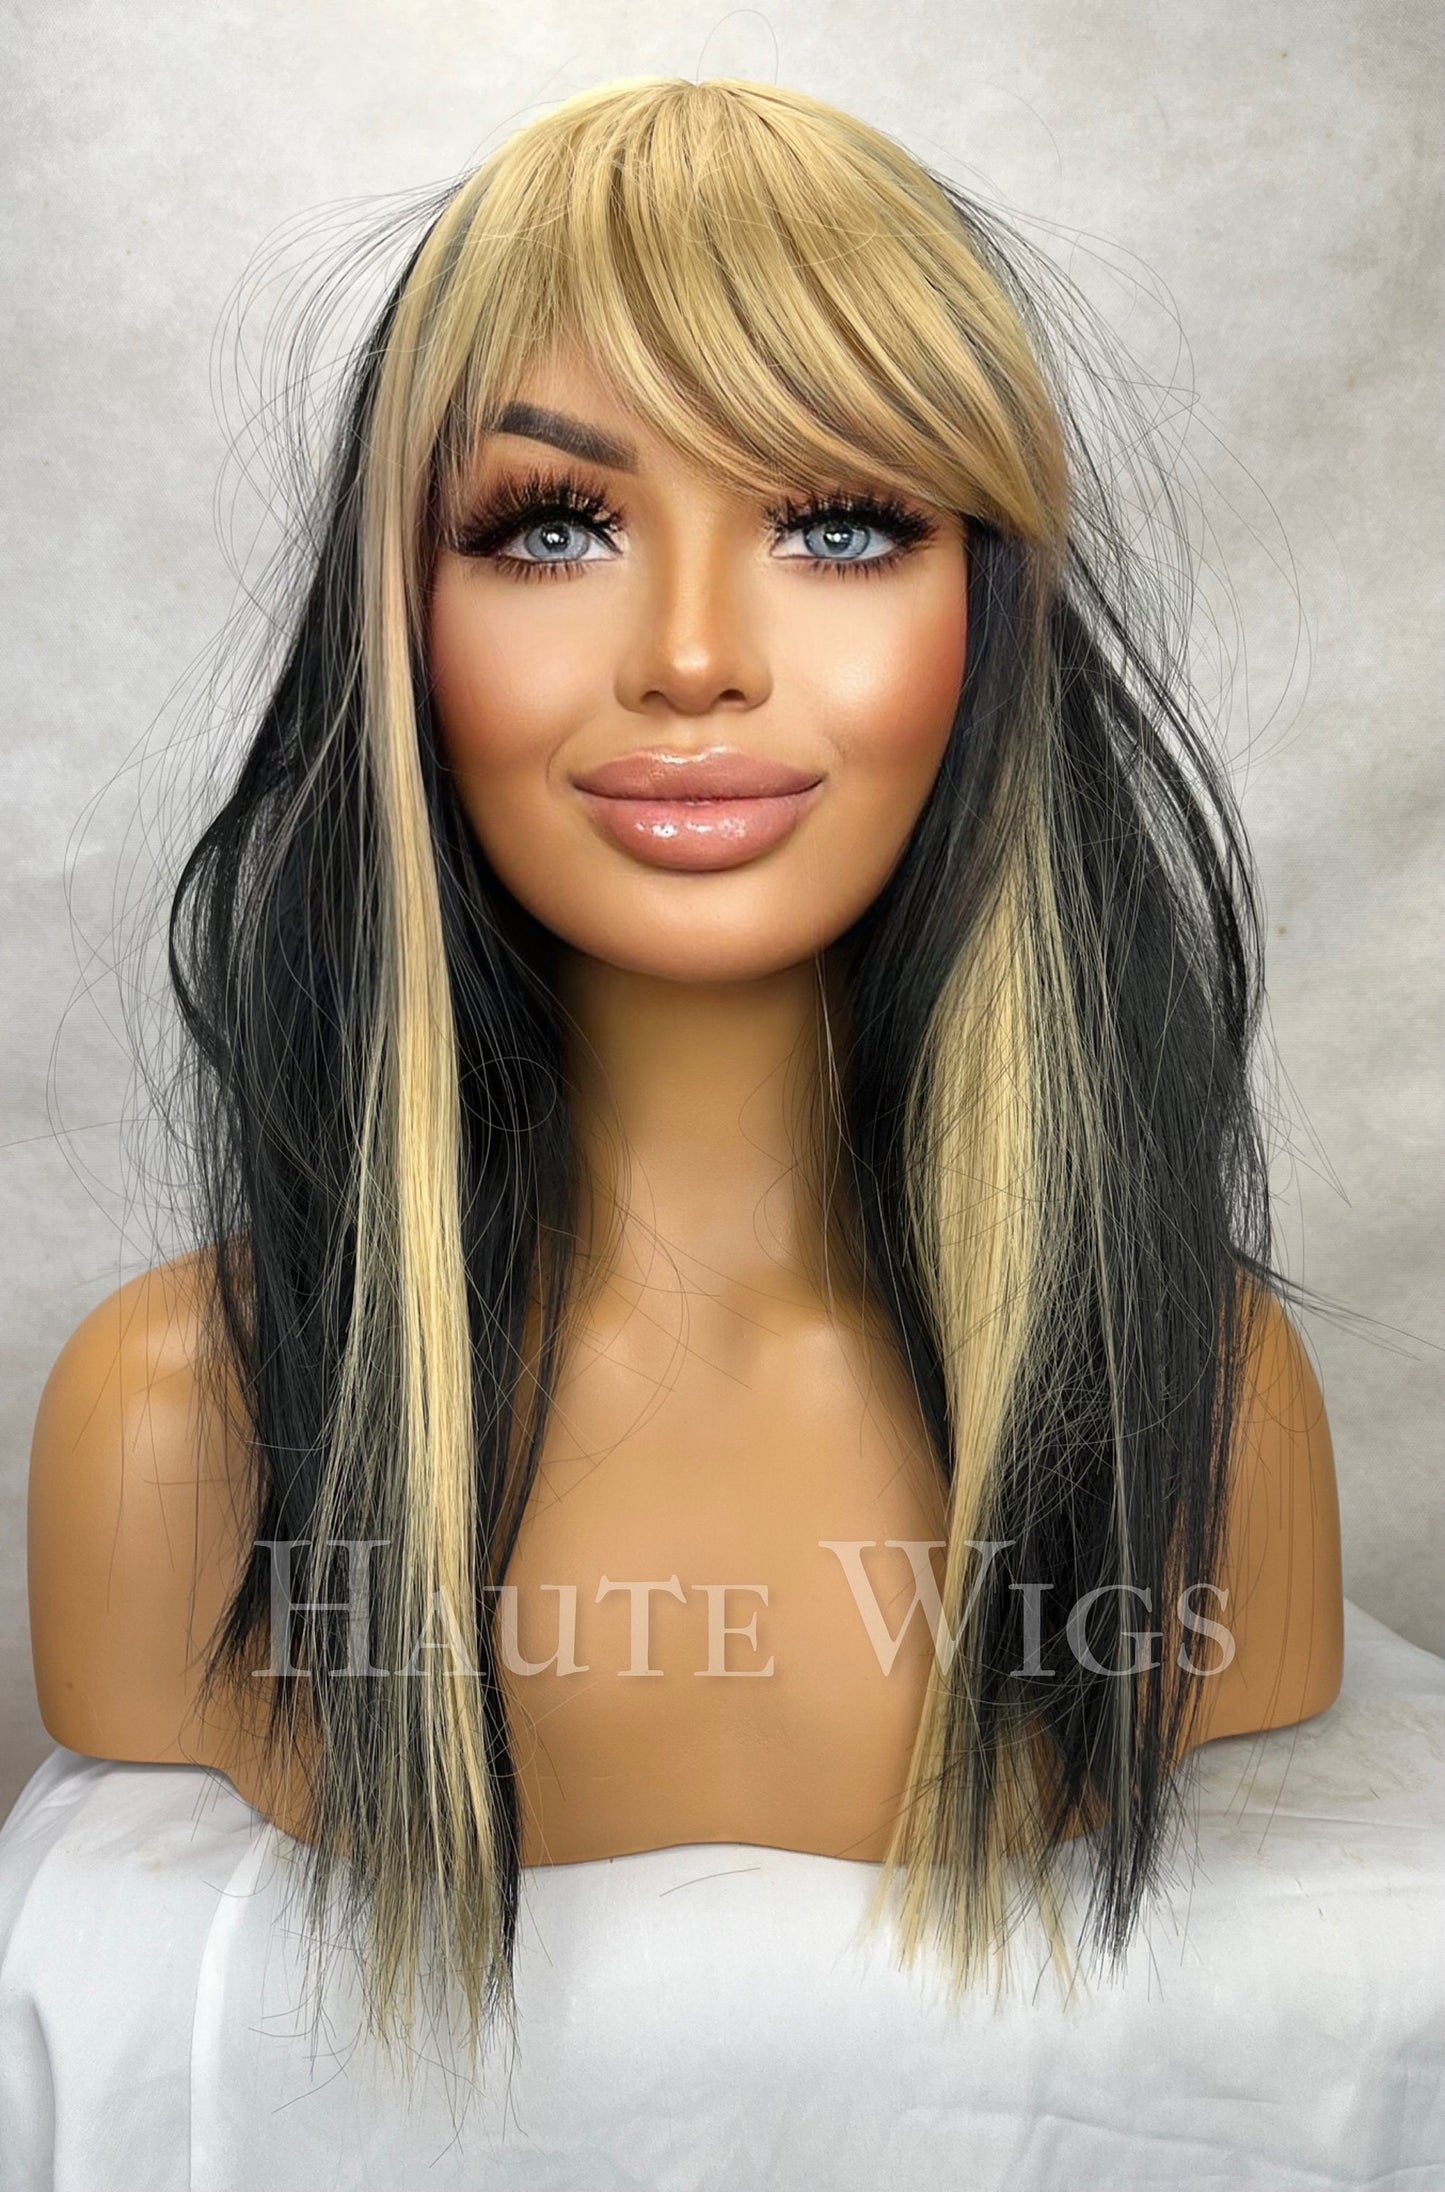 Hot mess - 20 Inch Long Womens Wig Black Brown | Golden Blonde Highlights Streaks Money Piece bangs fringe straight haute wigs role play